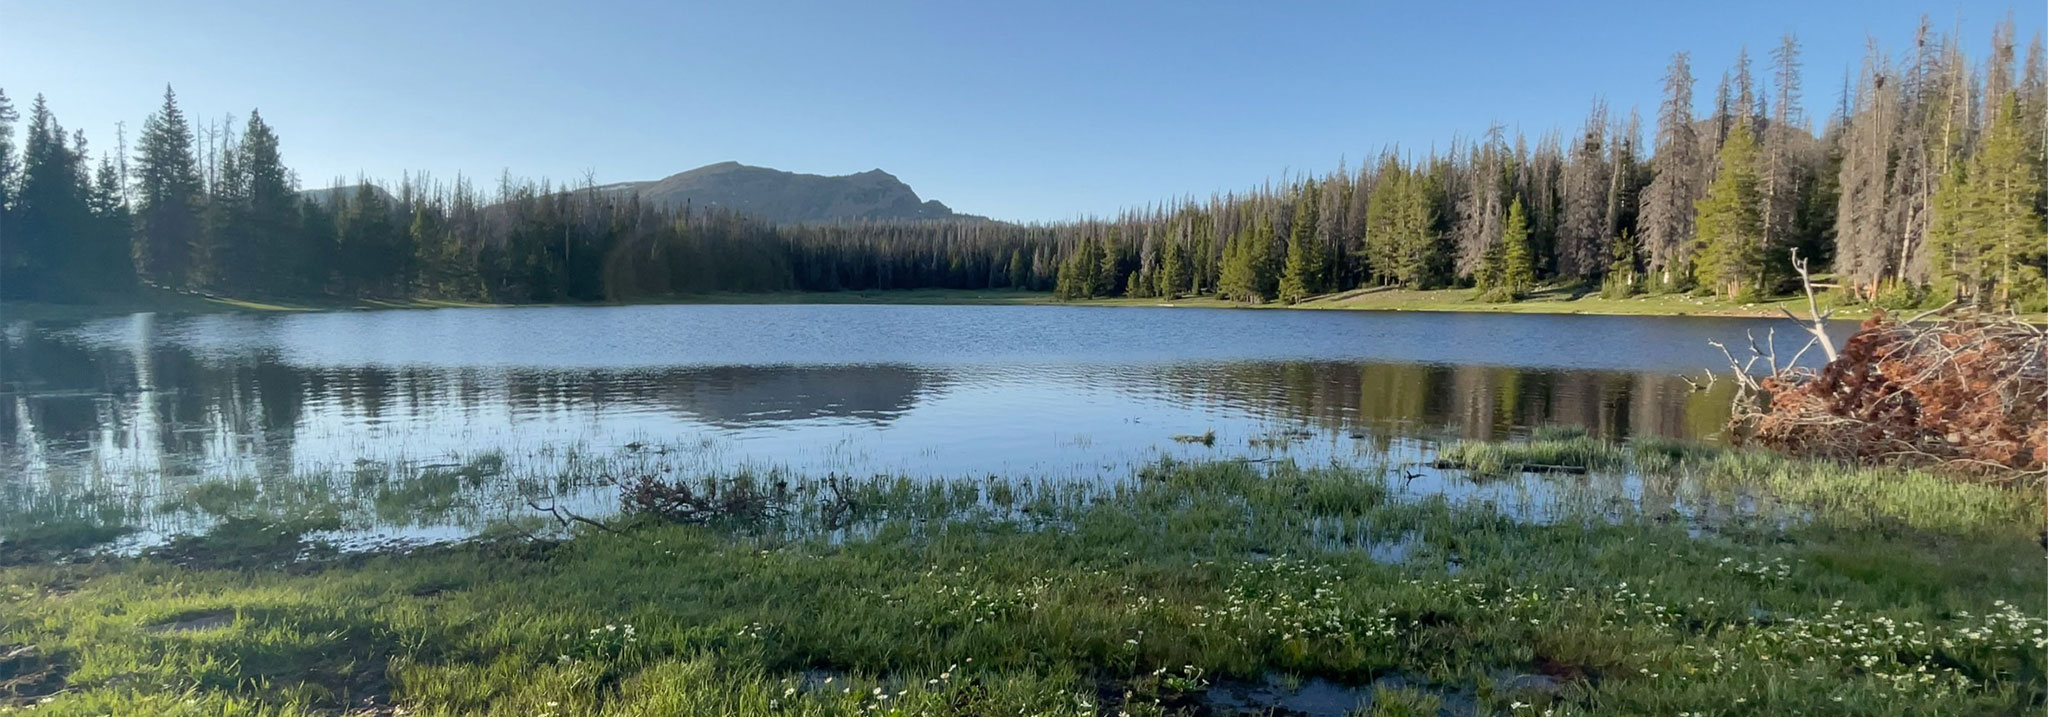 Lilly Lake, Mirror Lake Highway, Summit County